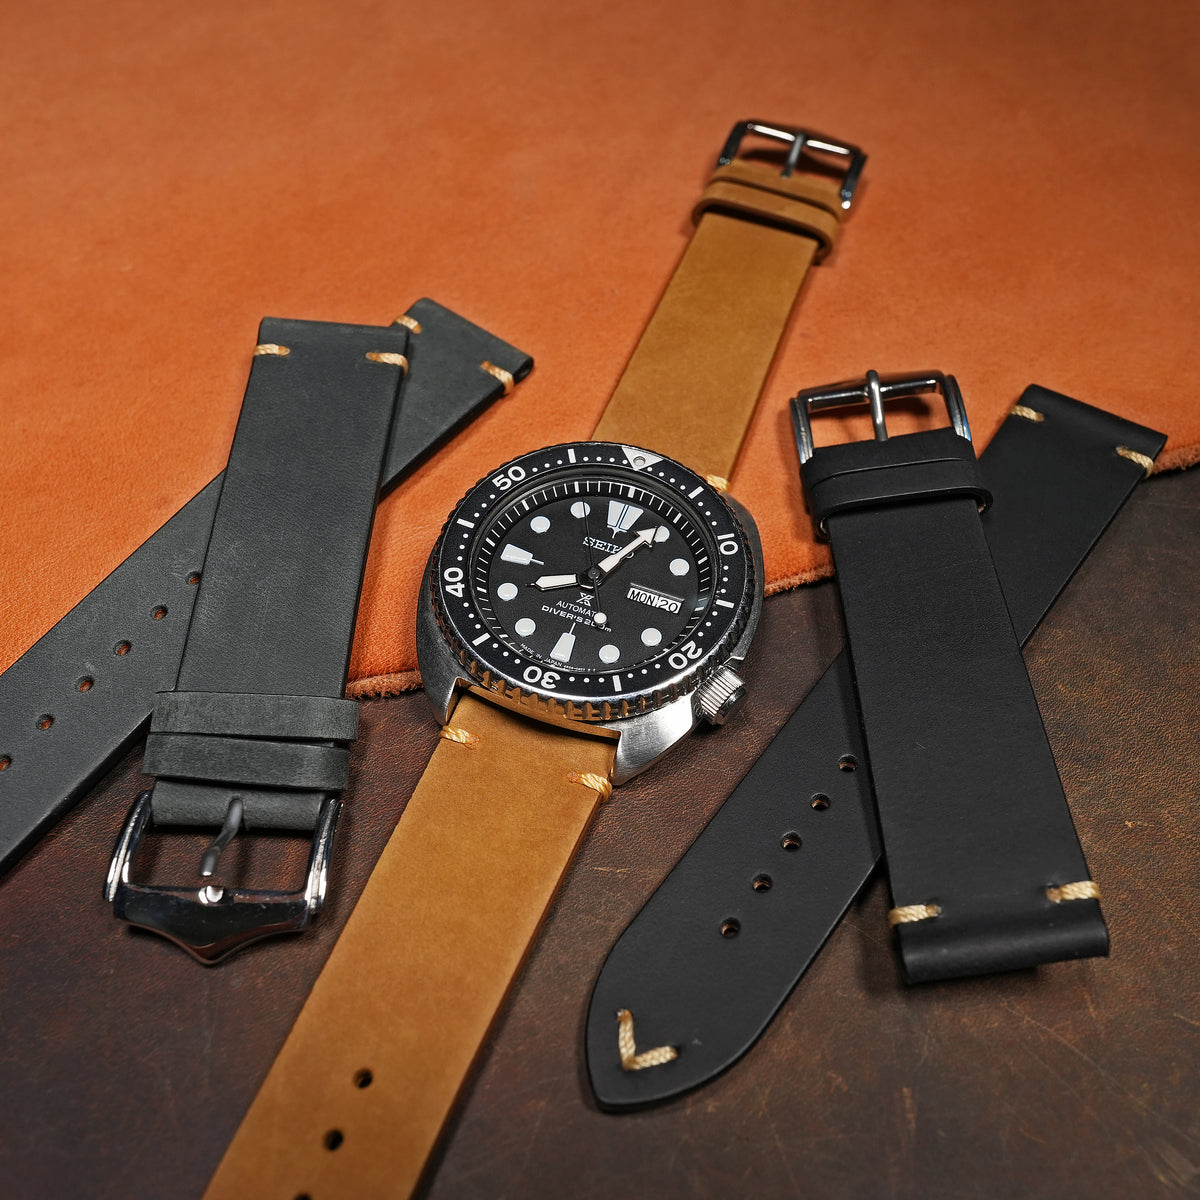 Premium Vintage Calf Leather Watch Strap in Tan